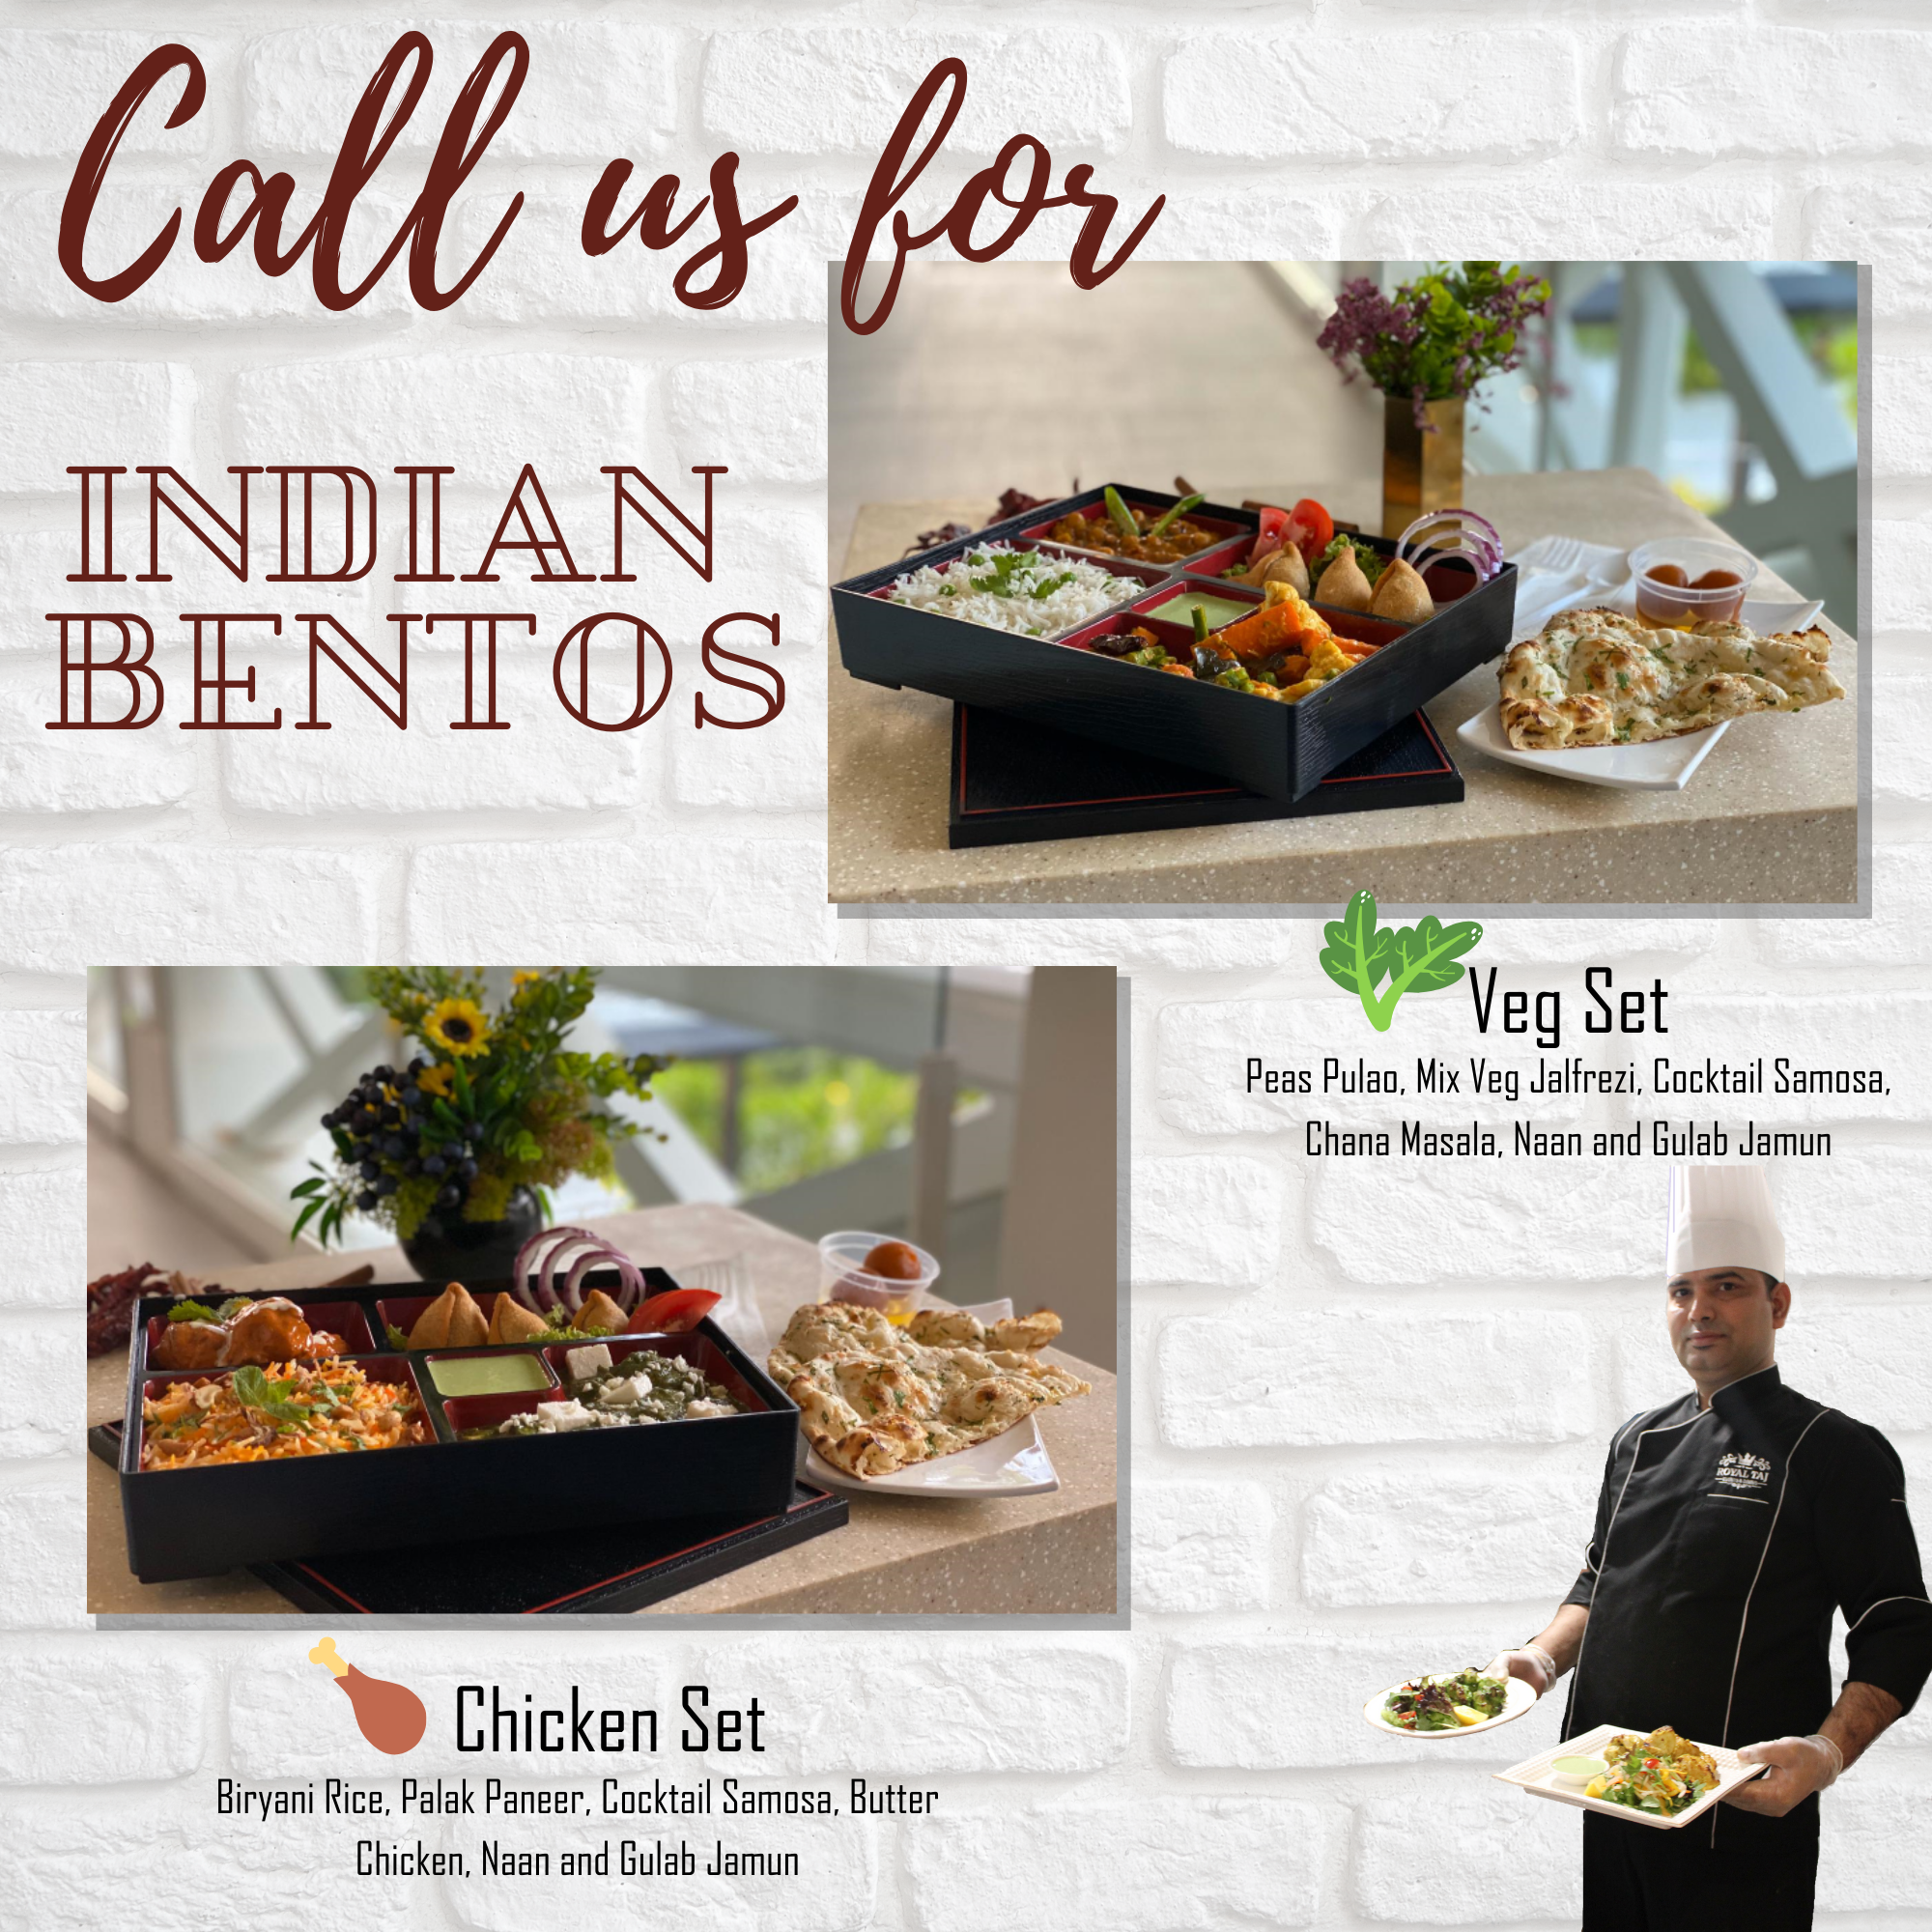 Corporate Bento Boxes :  Call us at 8456 8535 or 9118 5896 to discuss your requirements